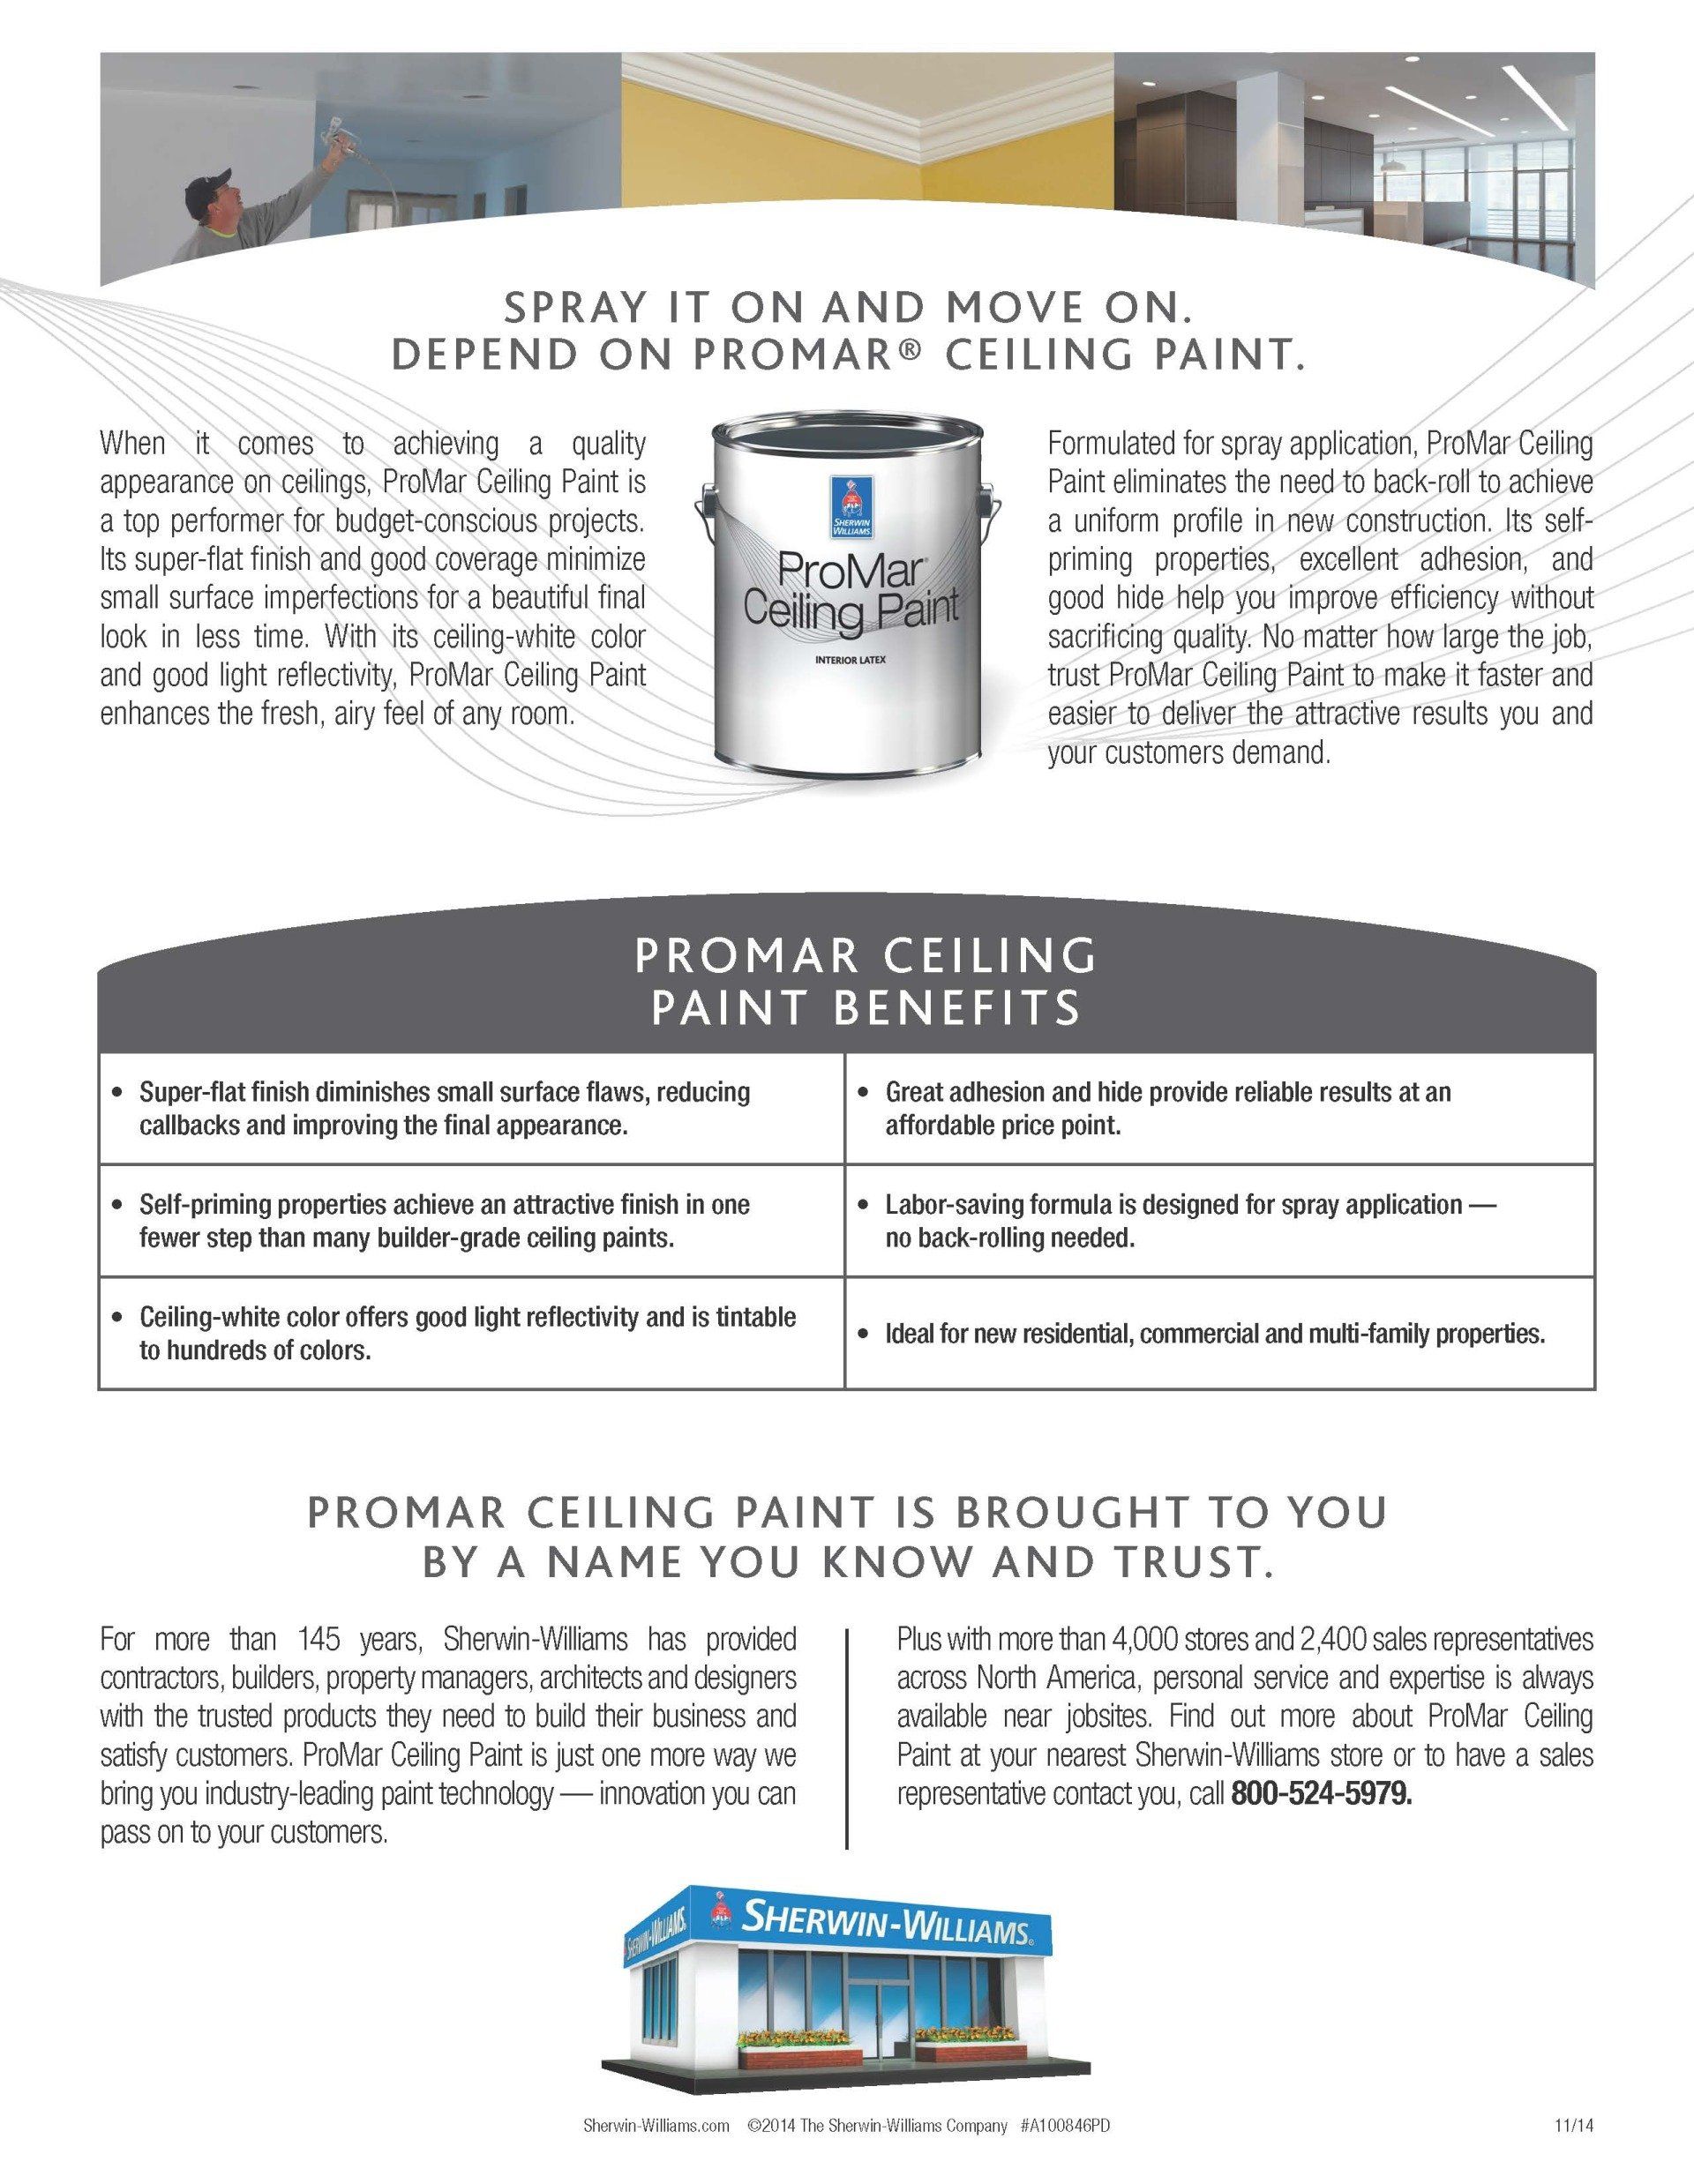 Learn About Sherwin Williams Promar Ceiling Paint